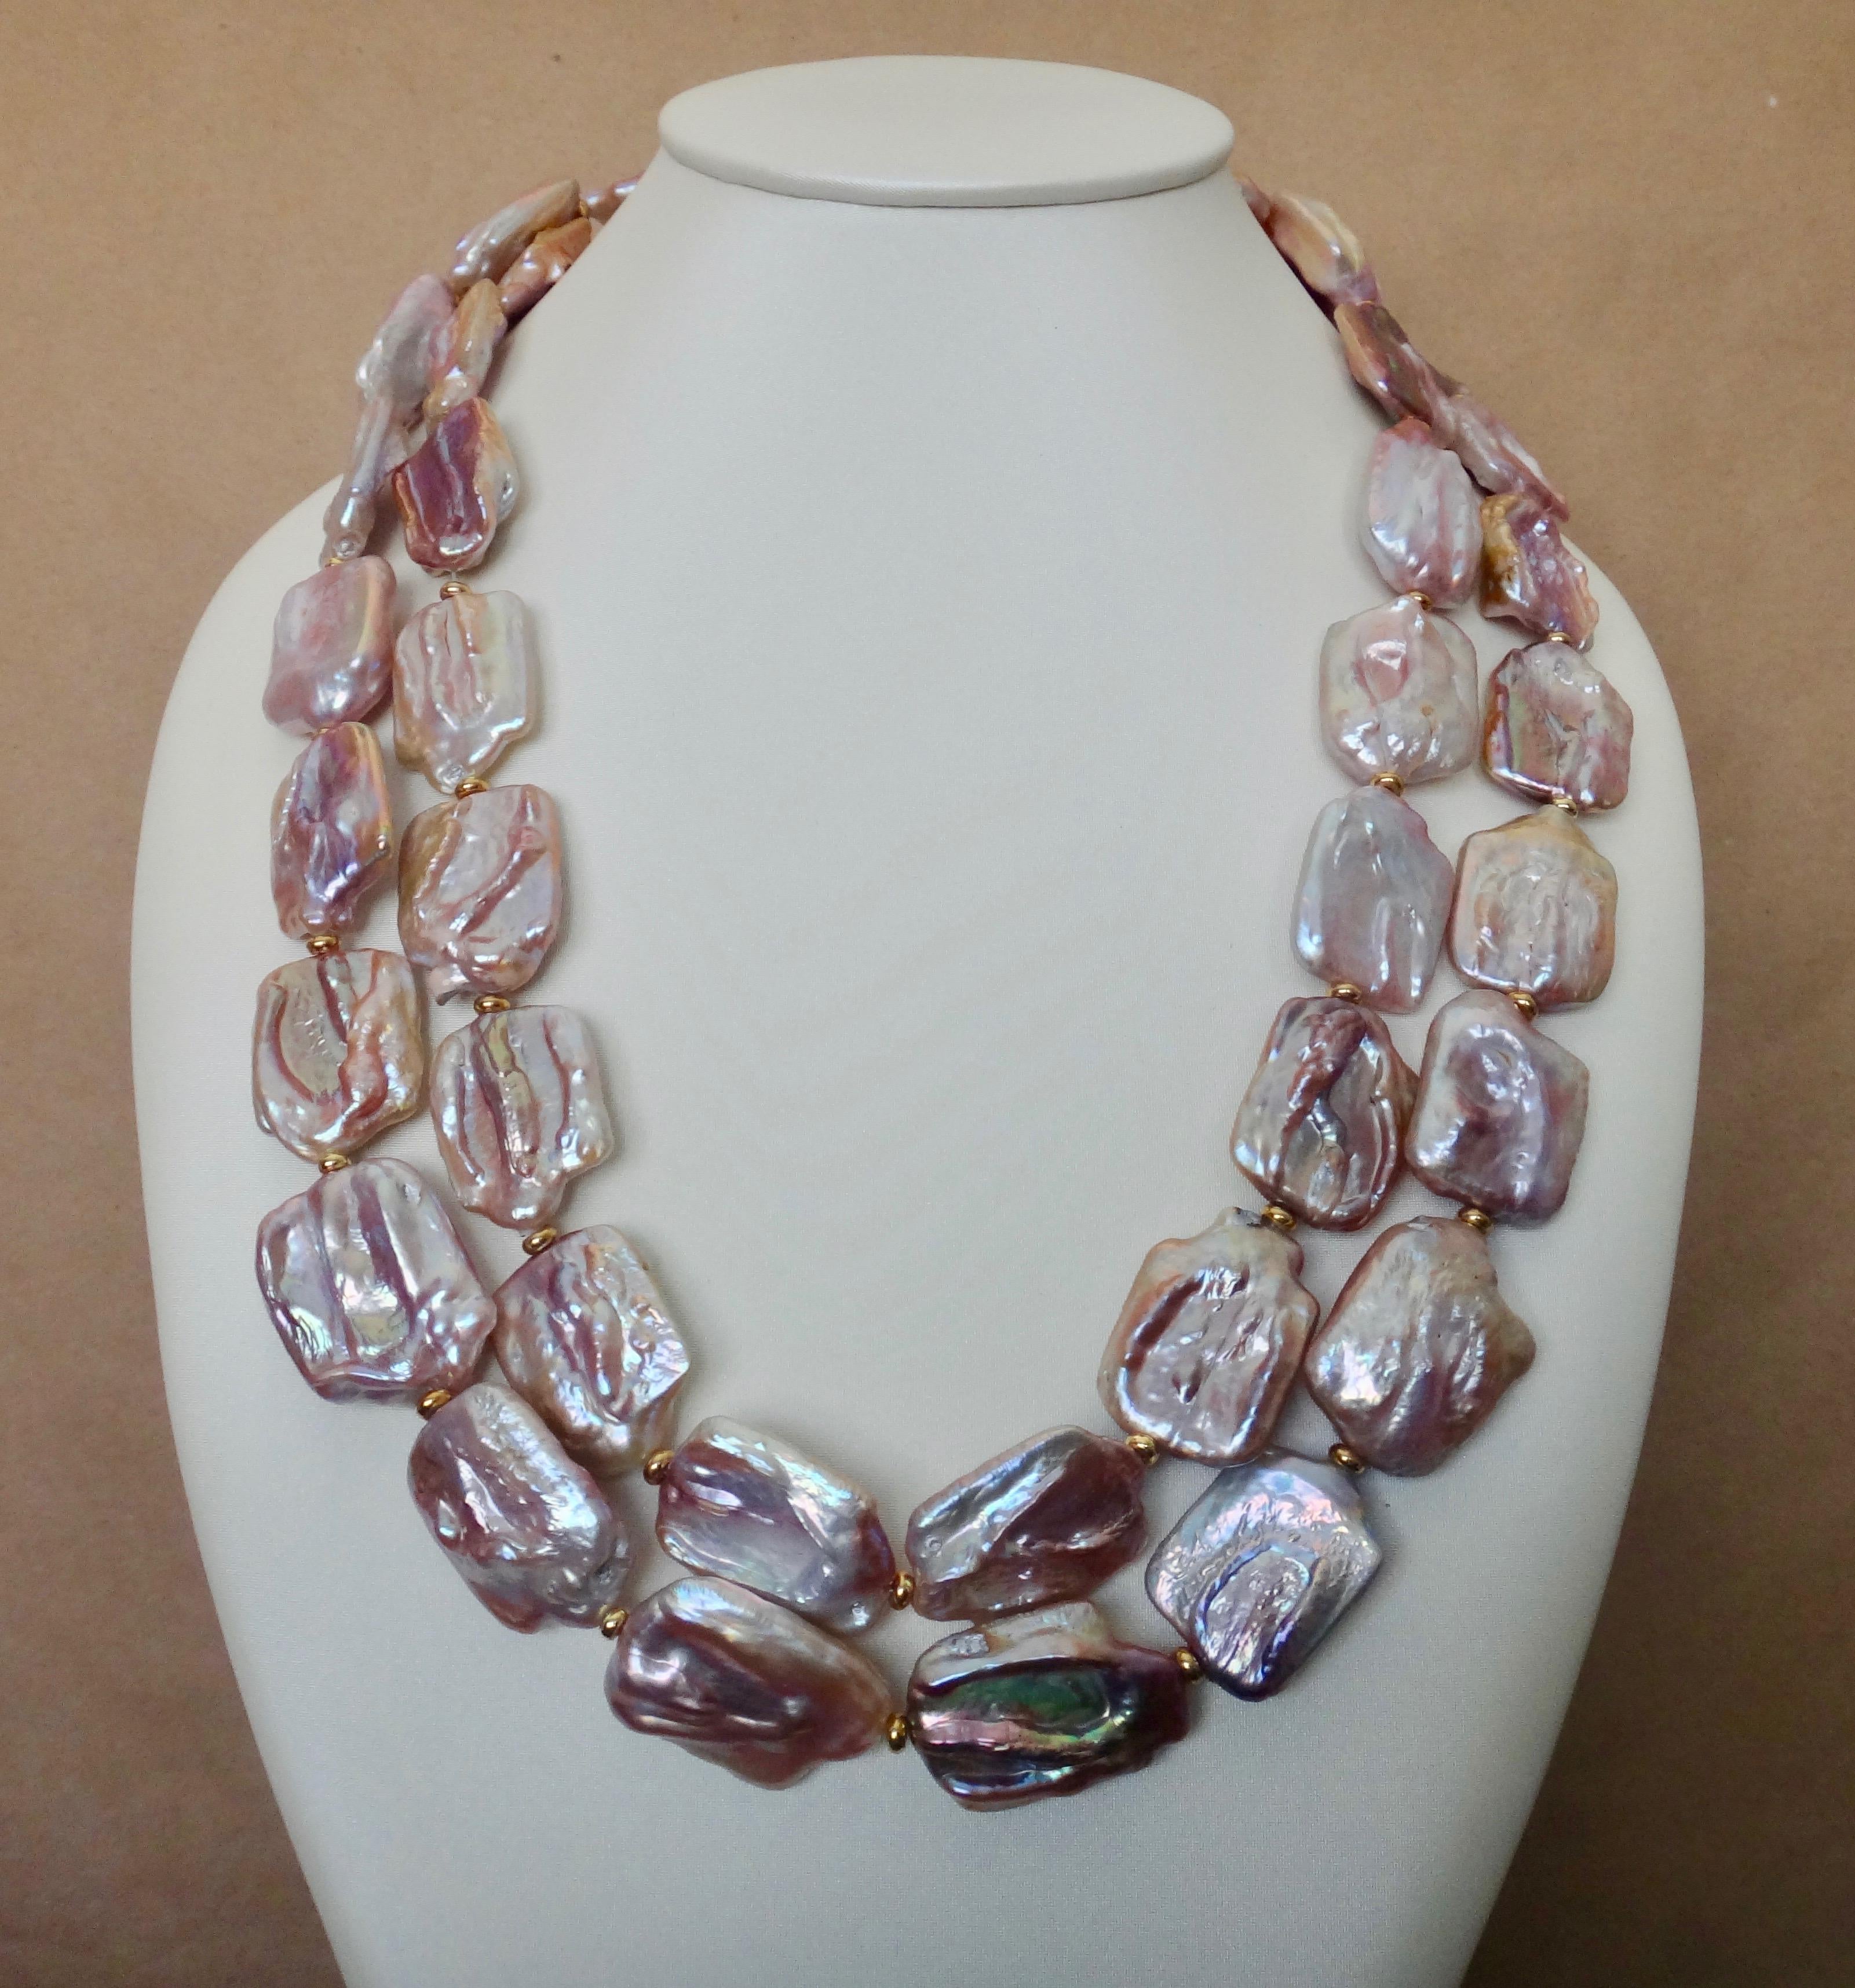 One long strand of pink tile pearls makes this a very versatile and easy to wear necklace.  The pearls average one inch by one inch in size.  They have a highly reflective, almost metallic luster and a dramatic range of colors from pale pink to